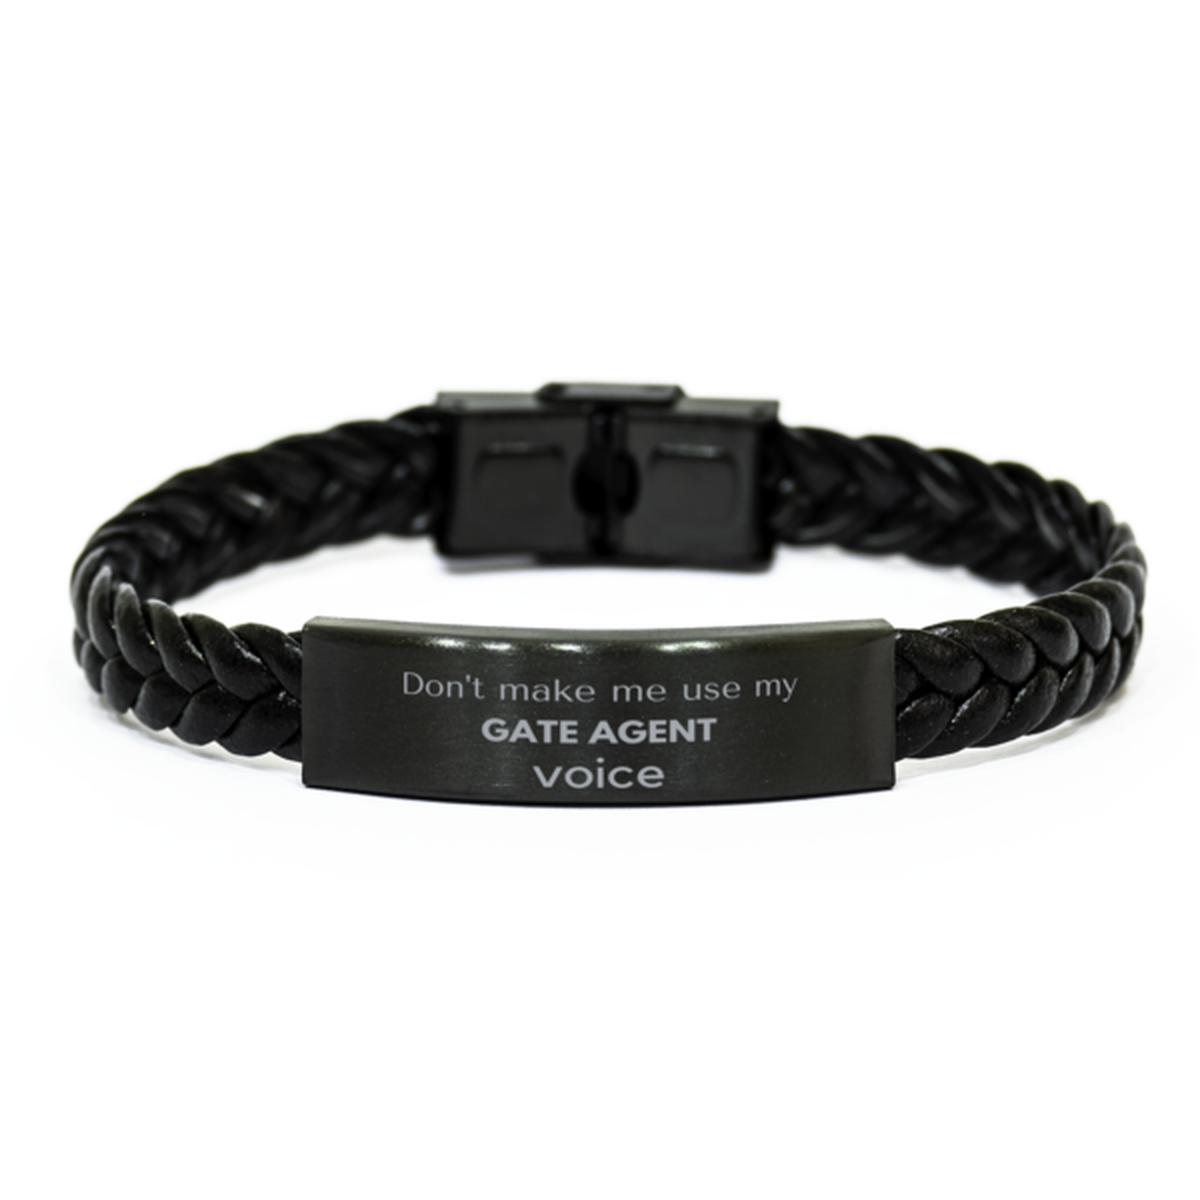 Don't make me use my Gate Agent voice, Sarcasm Gate Agent Gifts, Christmas Gate Agent Braided Leather Bracelet Birthday Unique Gifts For Gate Agent Coworkers, Men, Women, Colleague, Friends